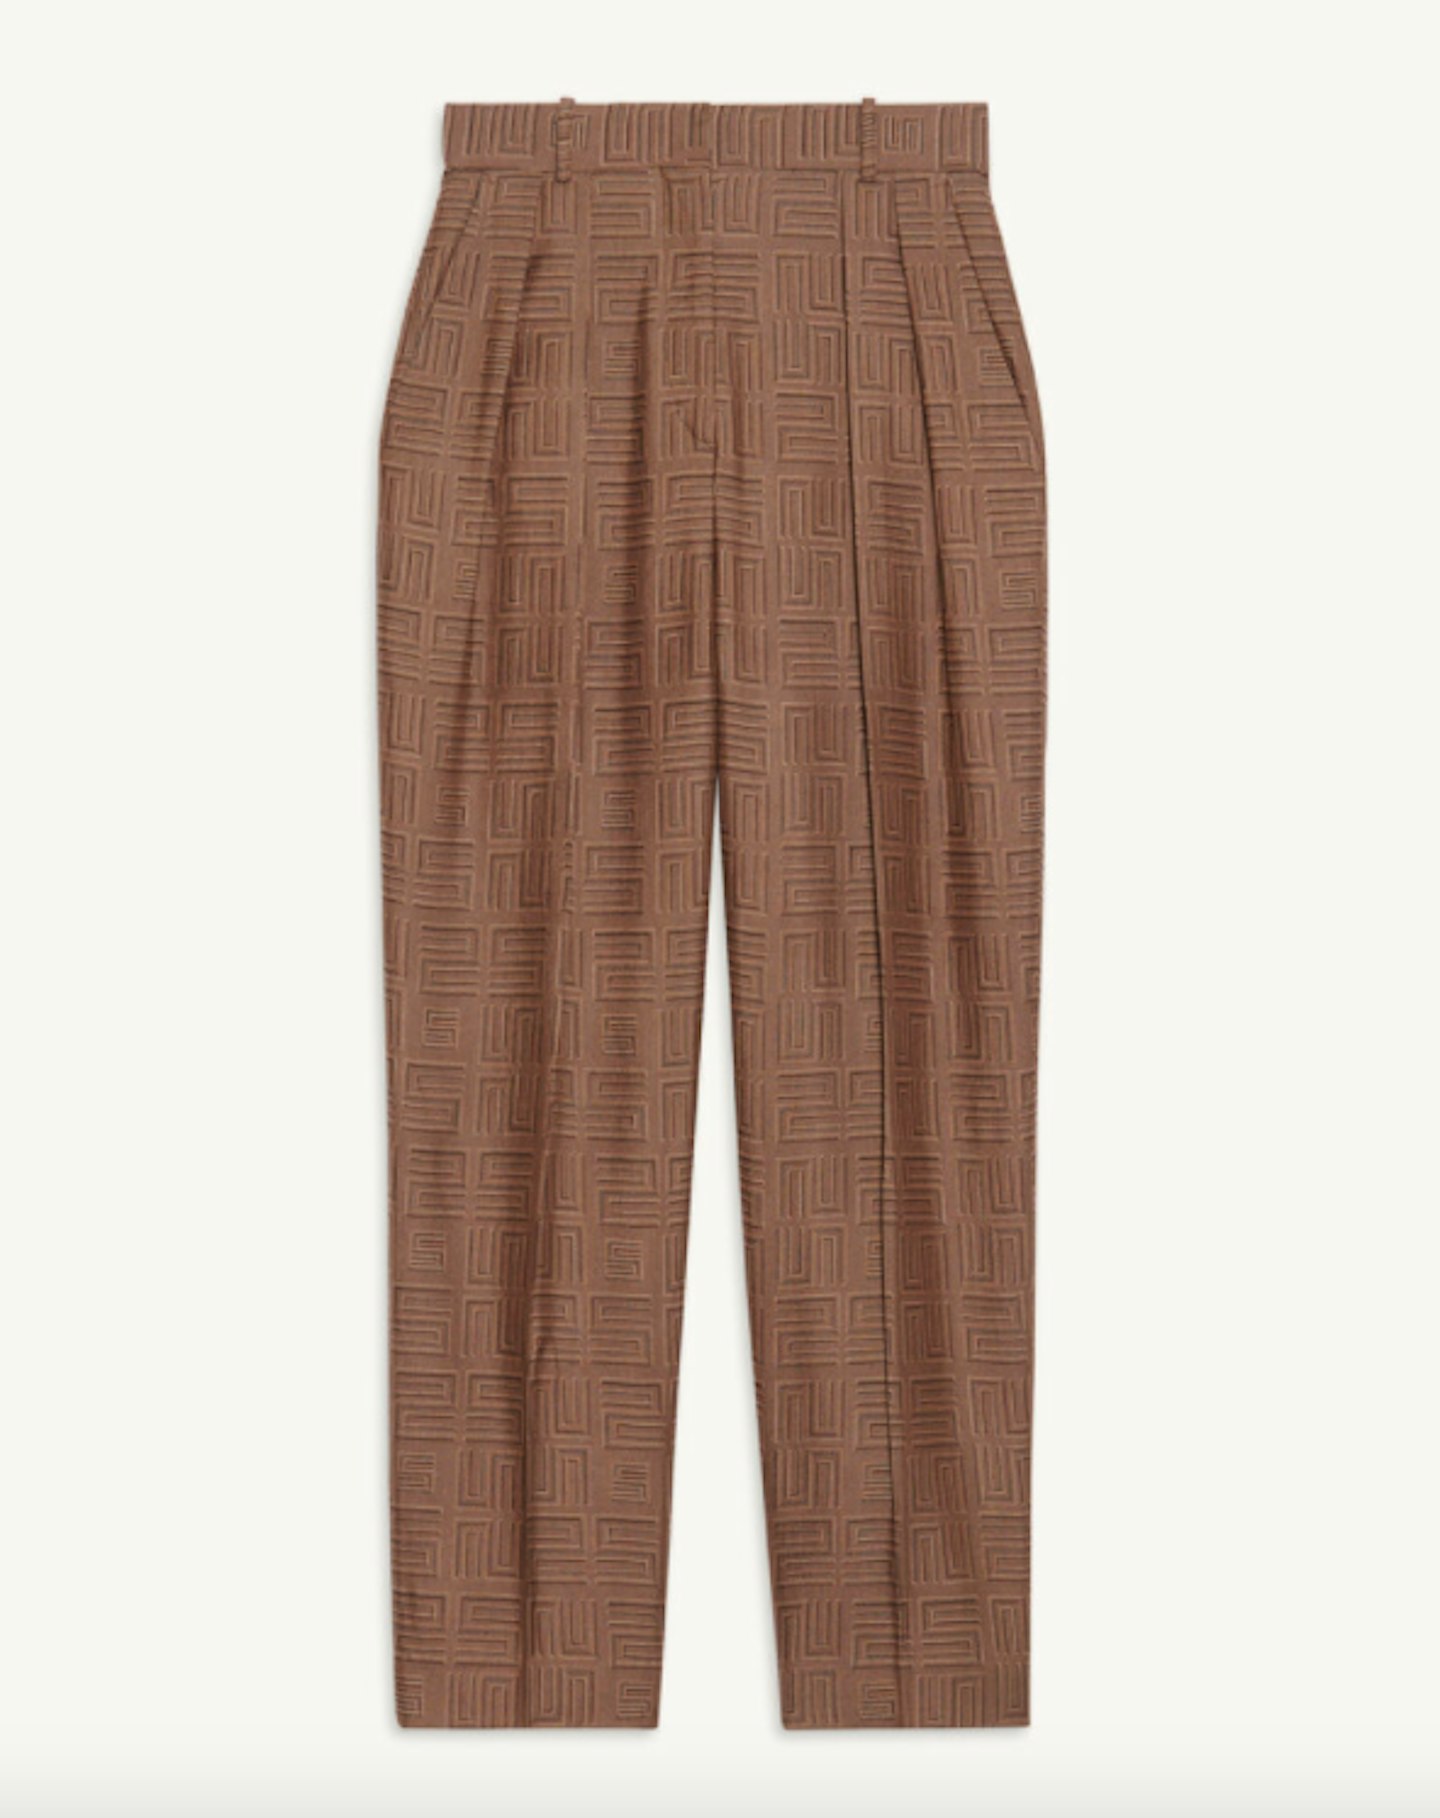 Sandro, High-Waisted Jacquard Trousers, WAS £279 NOW £139.50